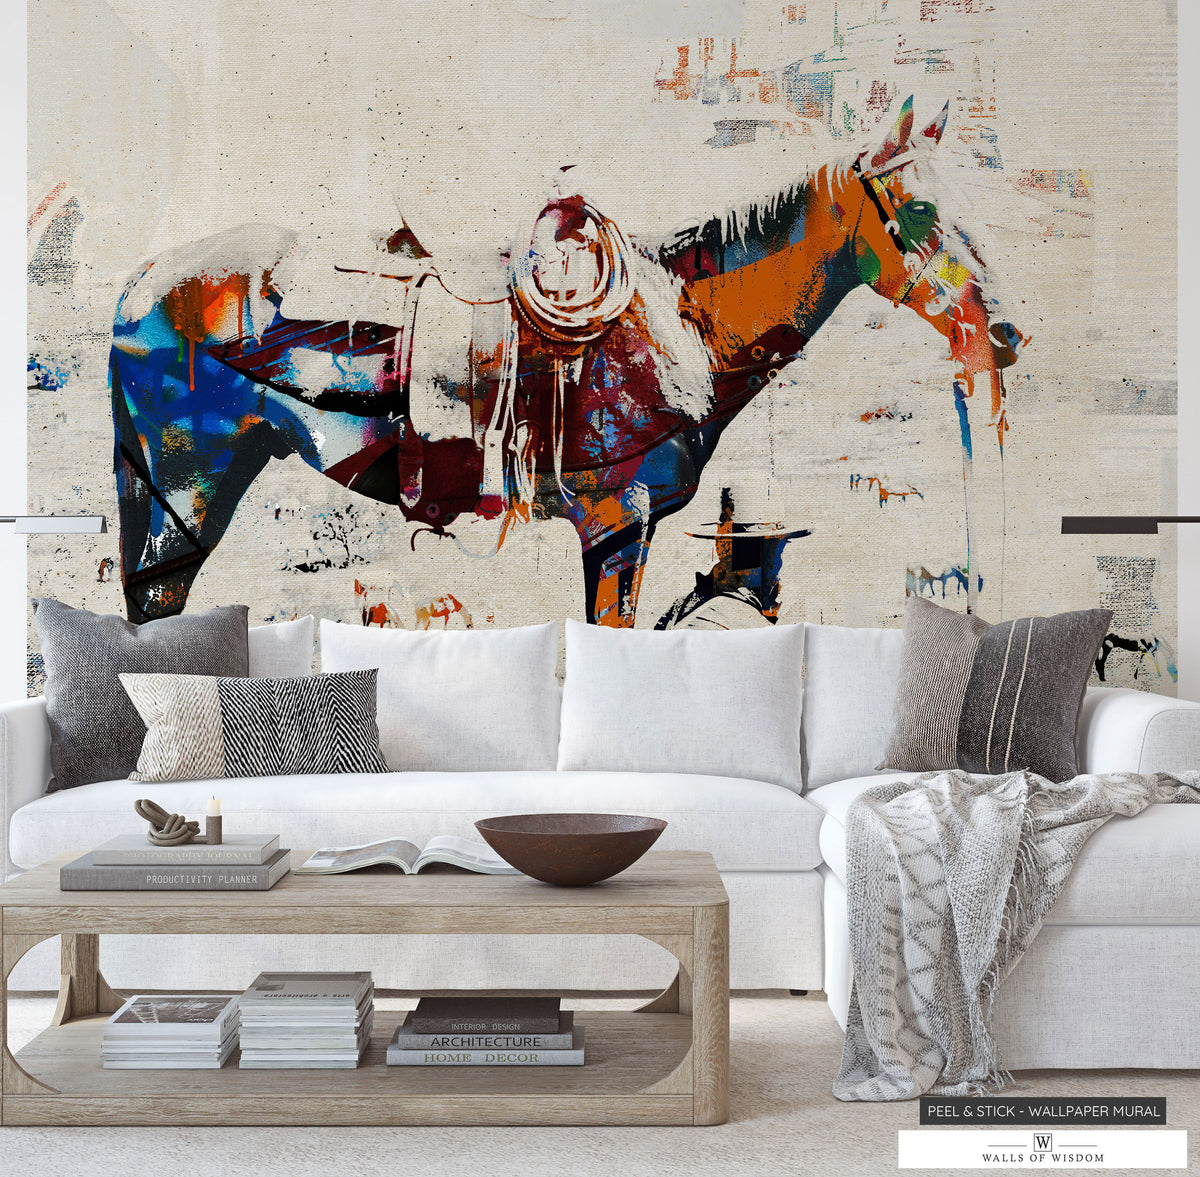 Contemporary 'Wild at Heart' Peel & Stick Mural featuring a colorful cowboy and horse.